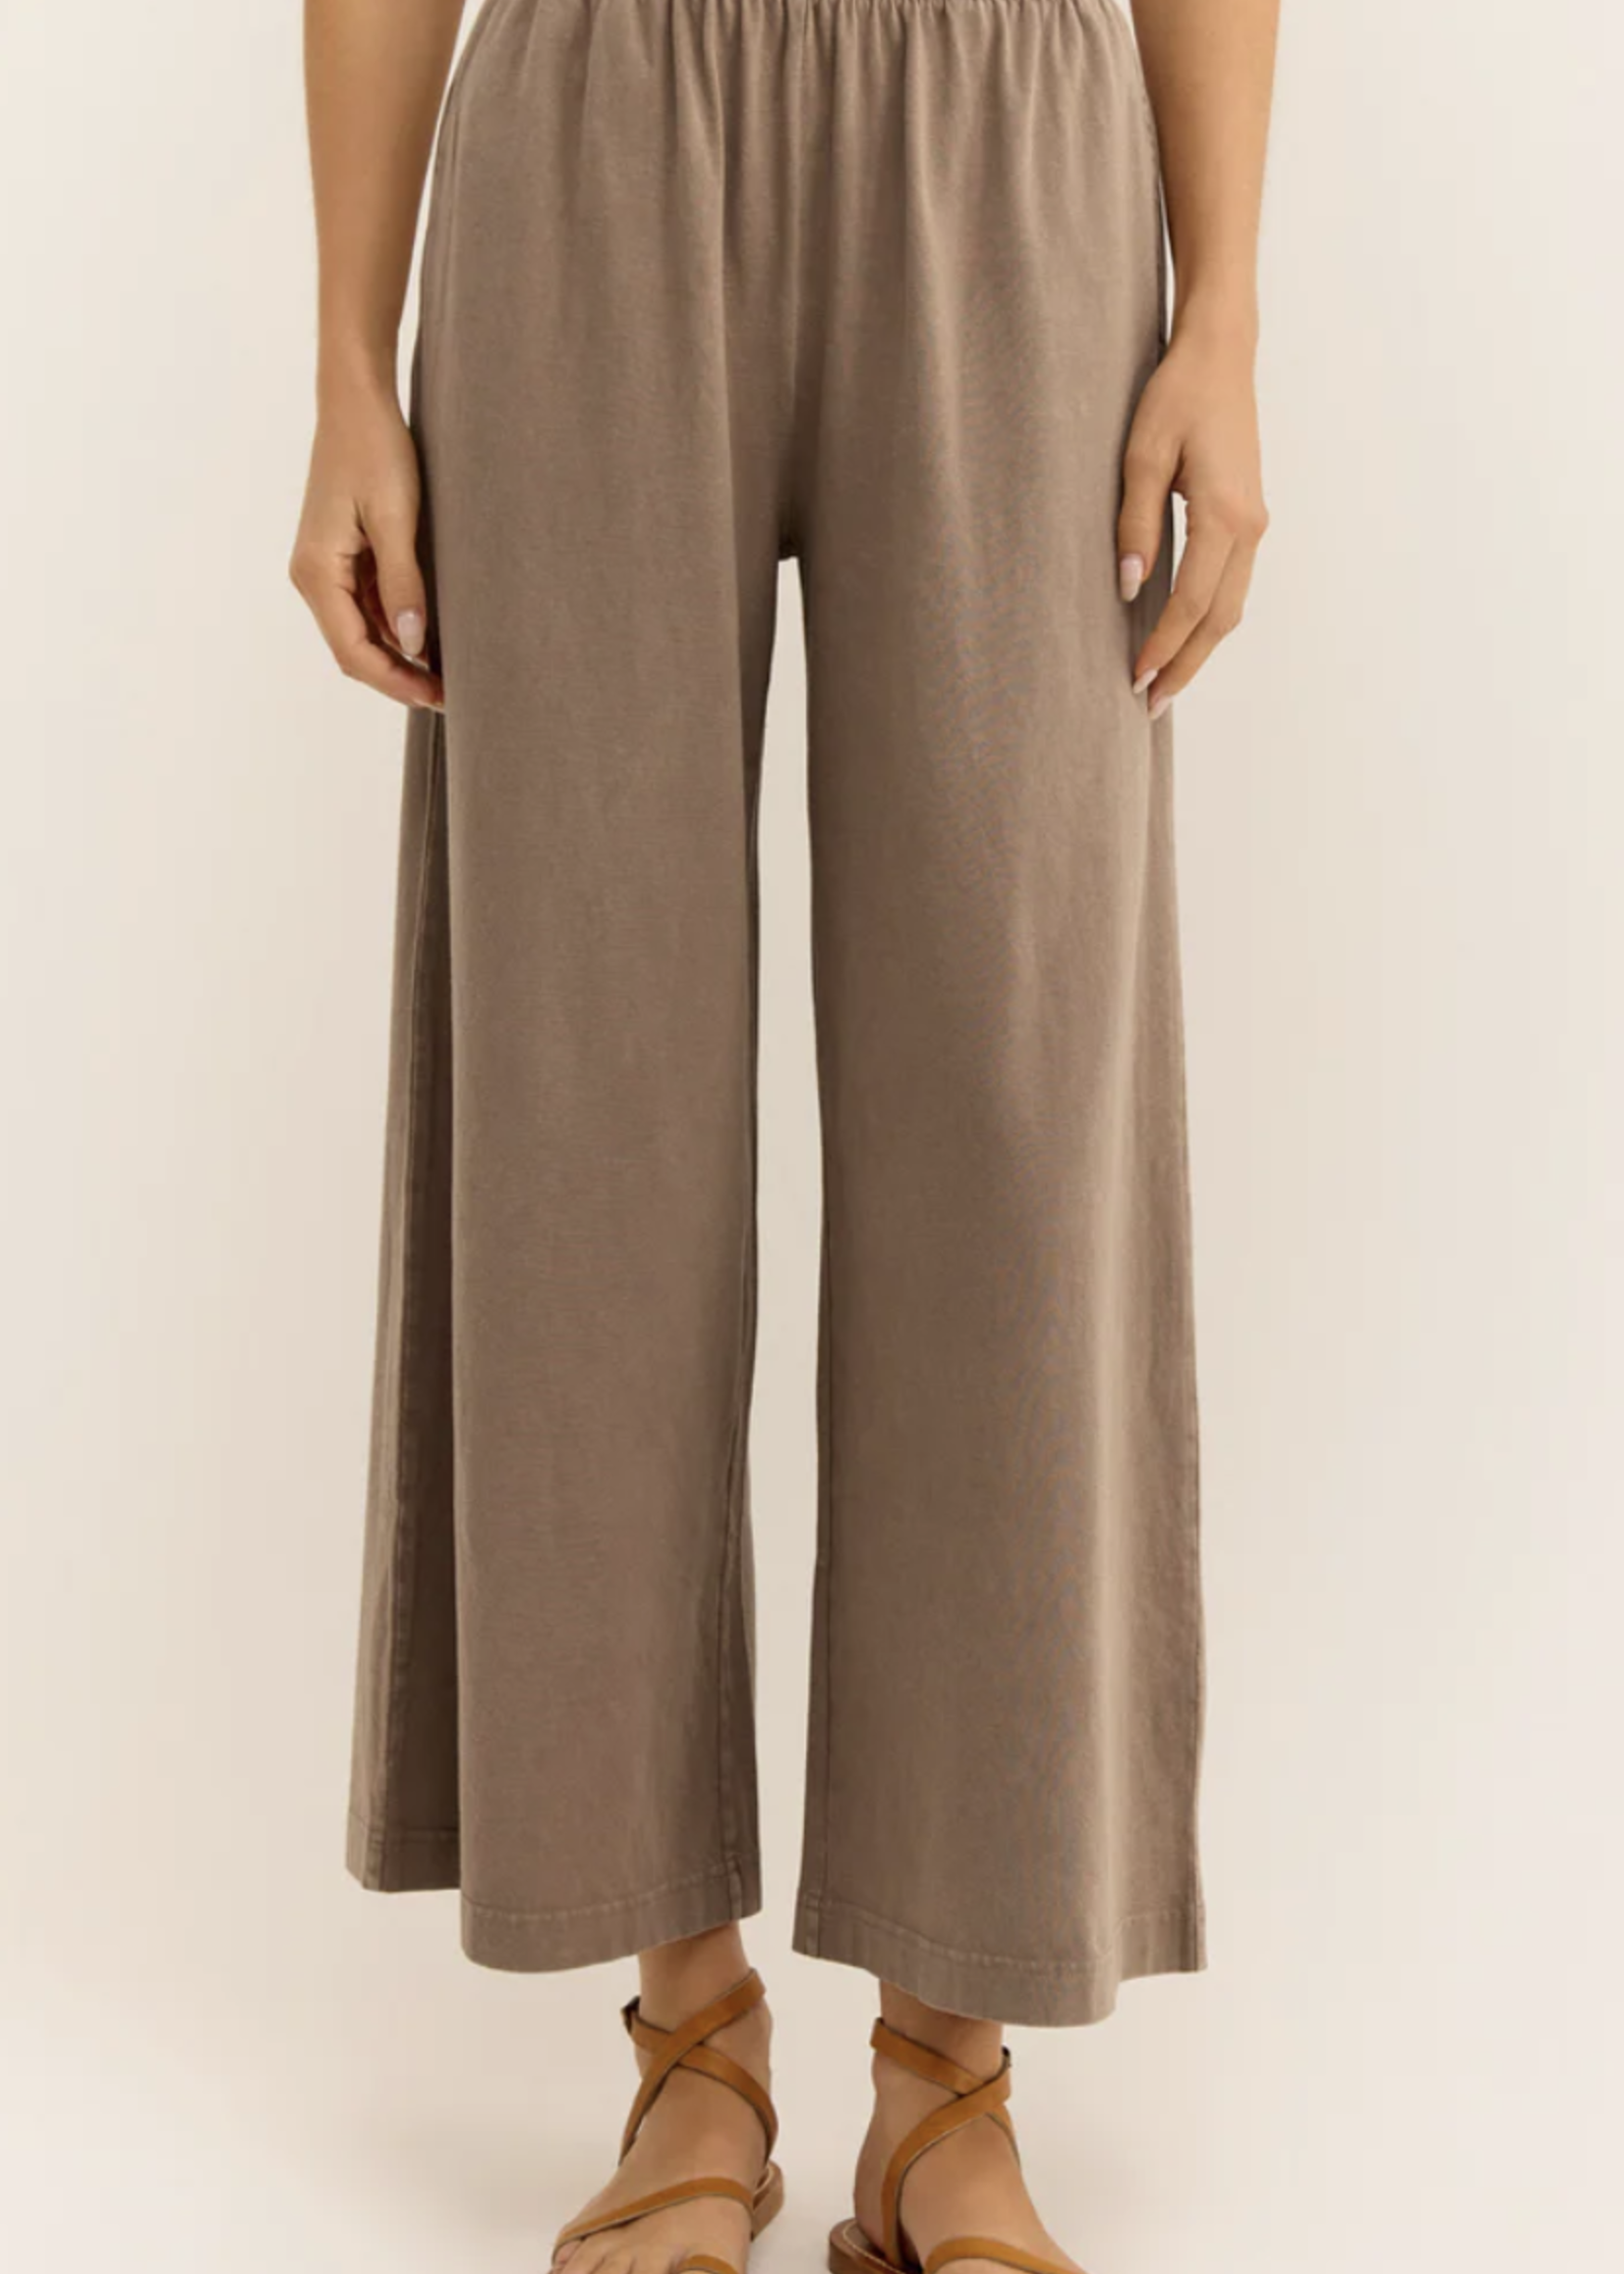 Z SUPPLY SCOUT JERSEY FLARE PANT